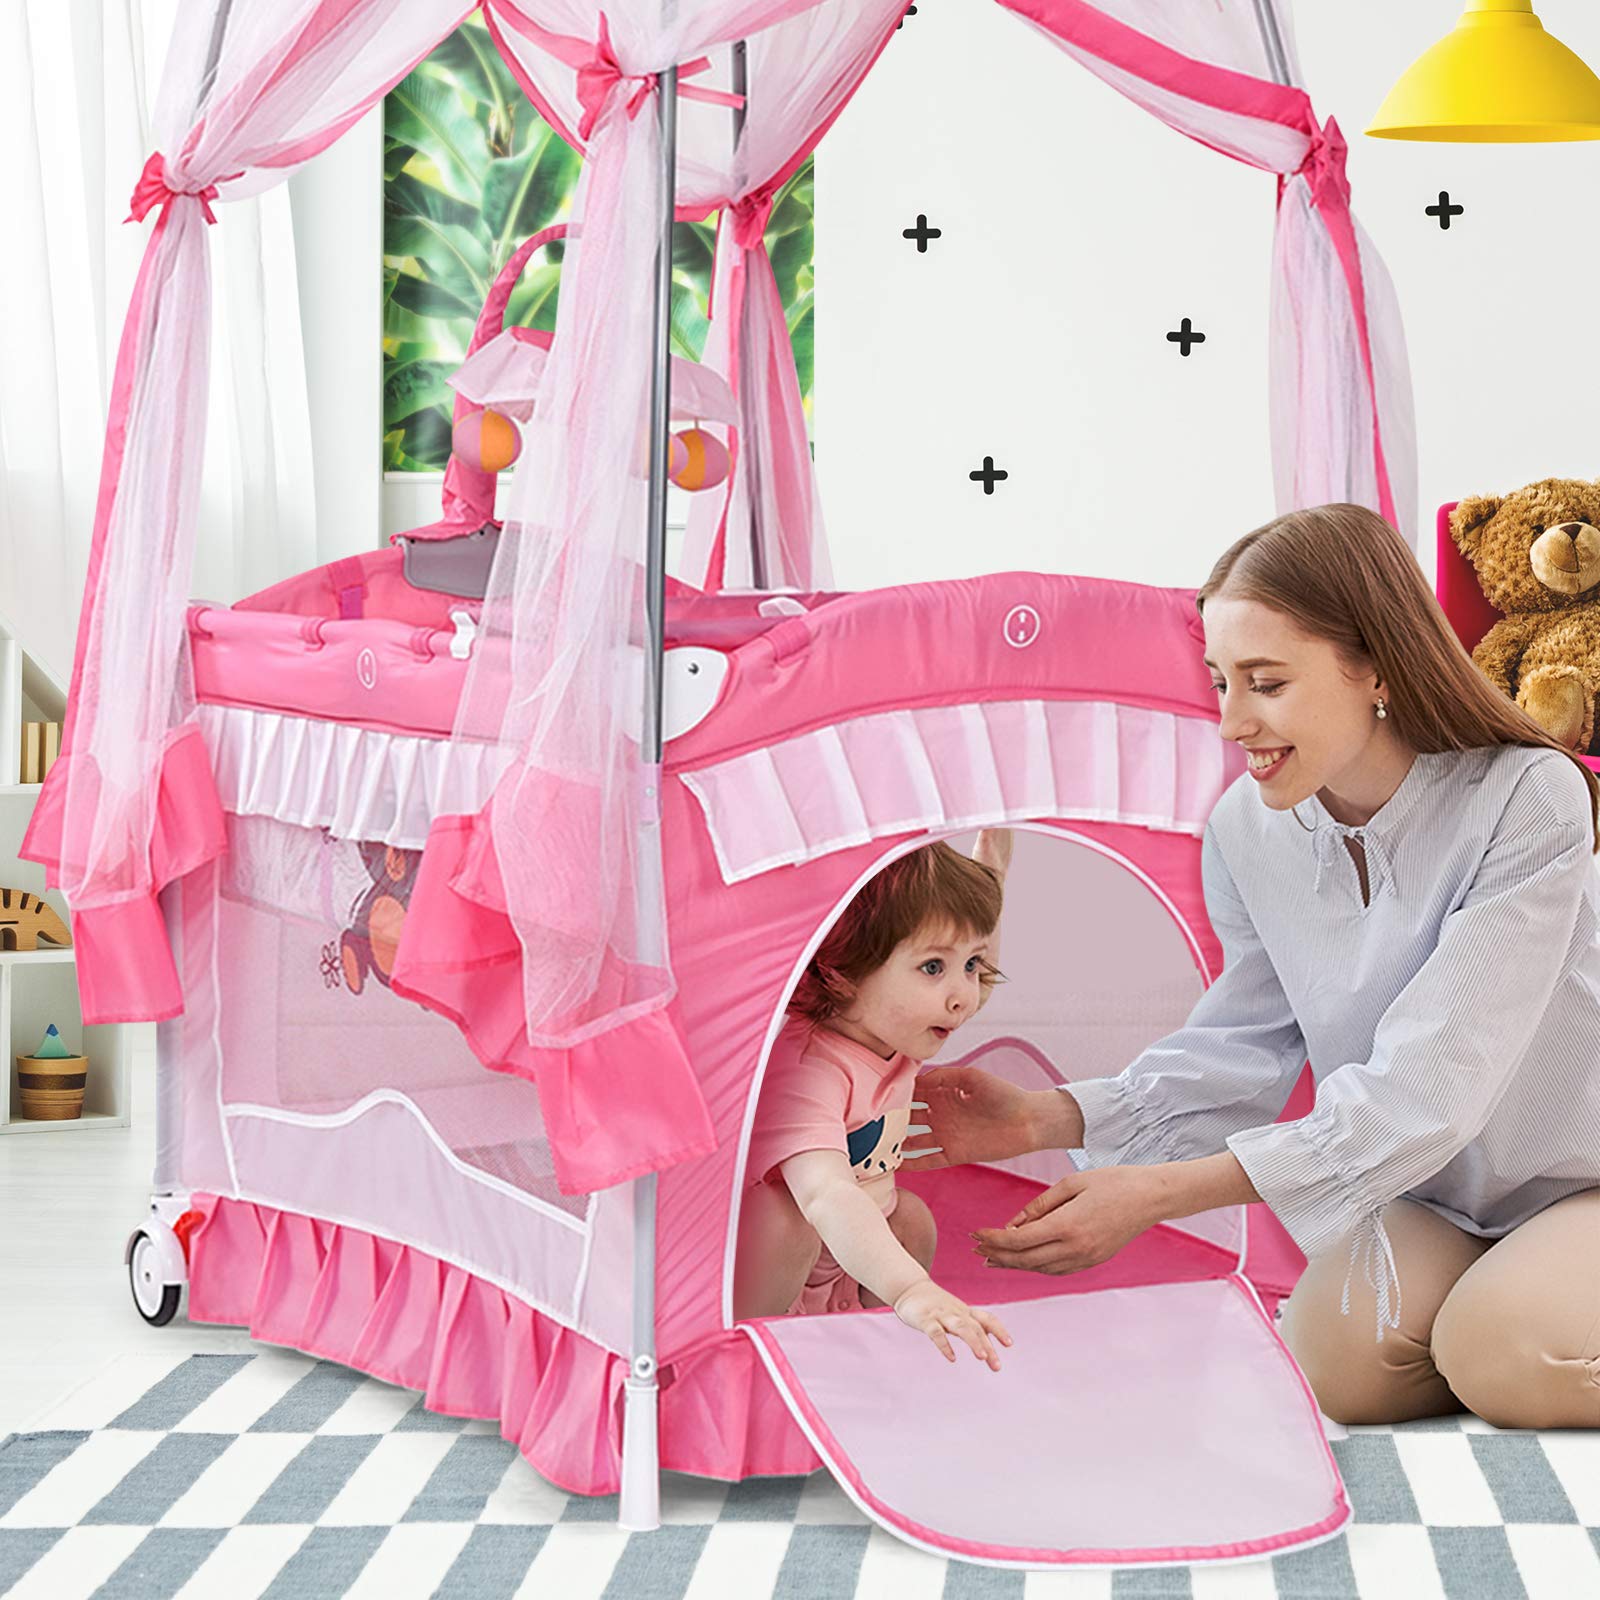 BABY JOY 4 in 1 Pack and Play with Extended Canopy, Portable Baby Playard Bedside Sleeper with Side Zipper Entrance, Wheels & Brake, Baby Girl Pink Bassinet Crib from Newborn to Toddler